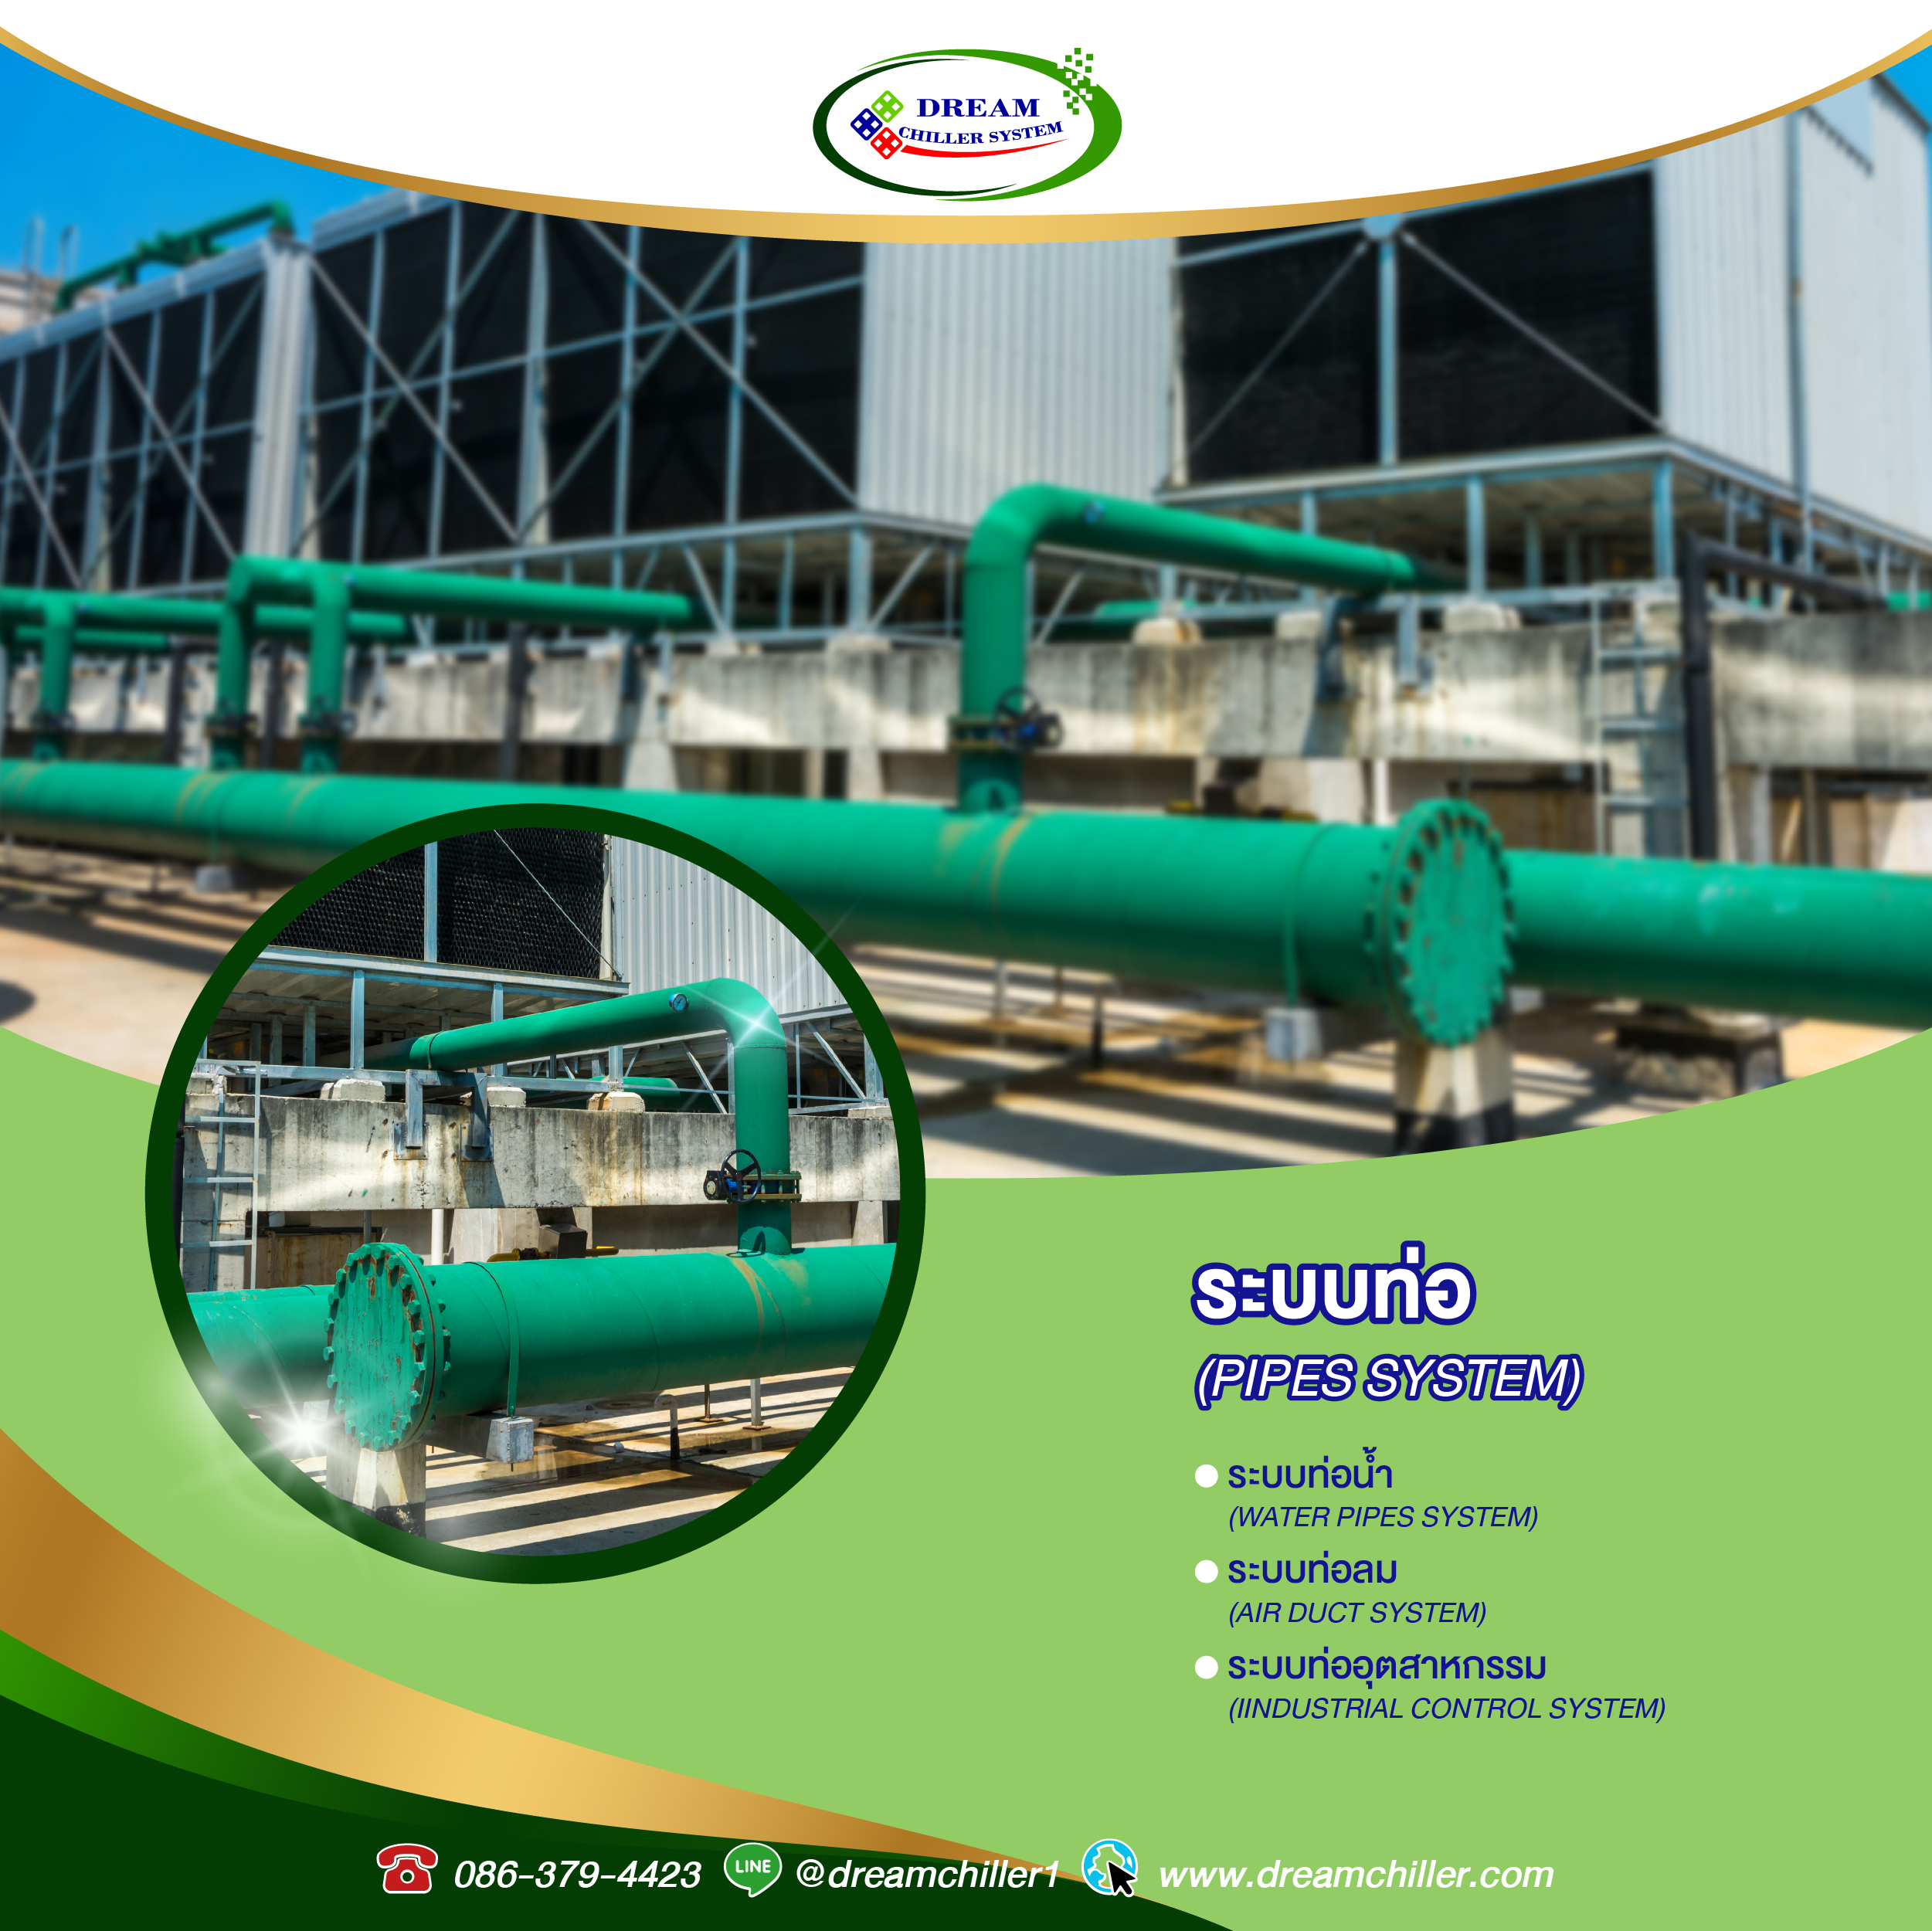 PIPE SYSTEM